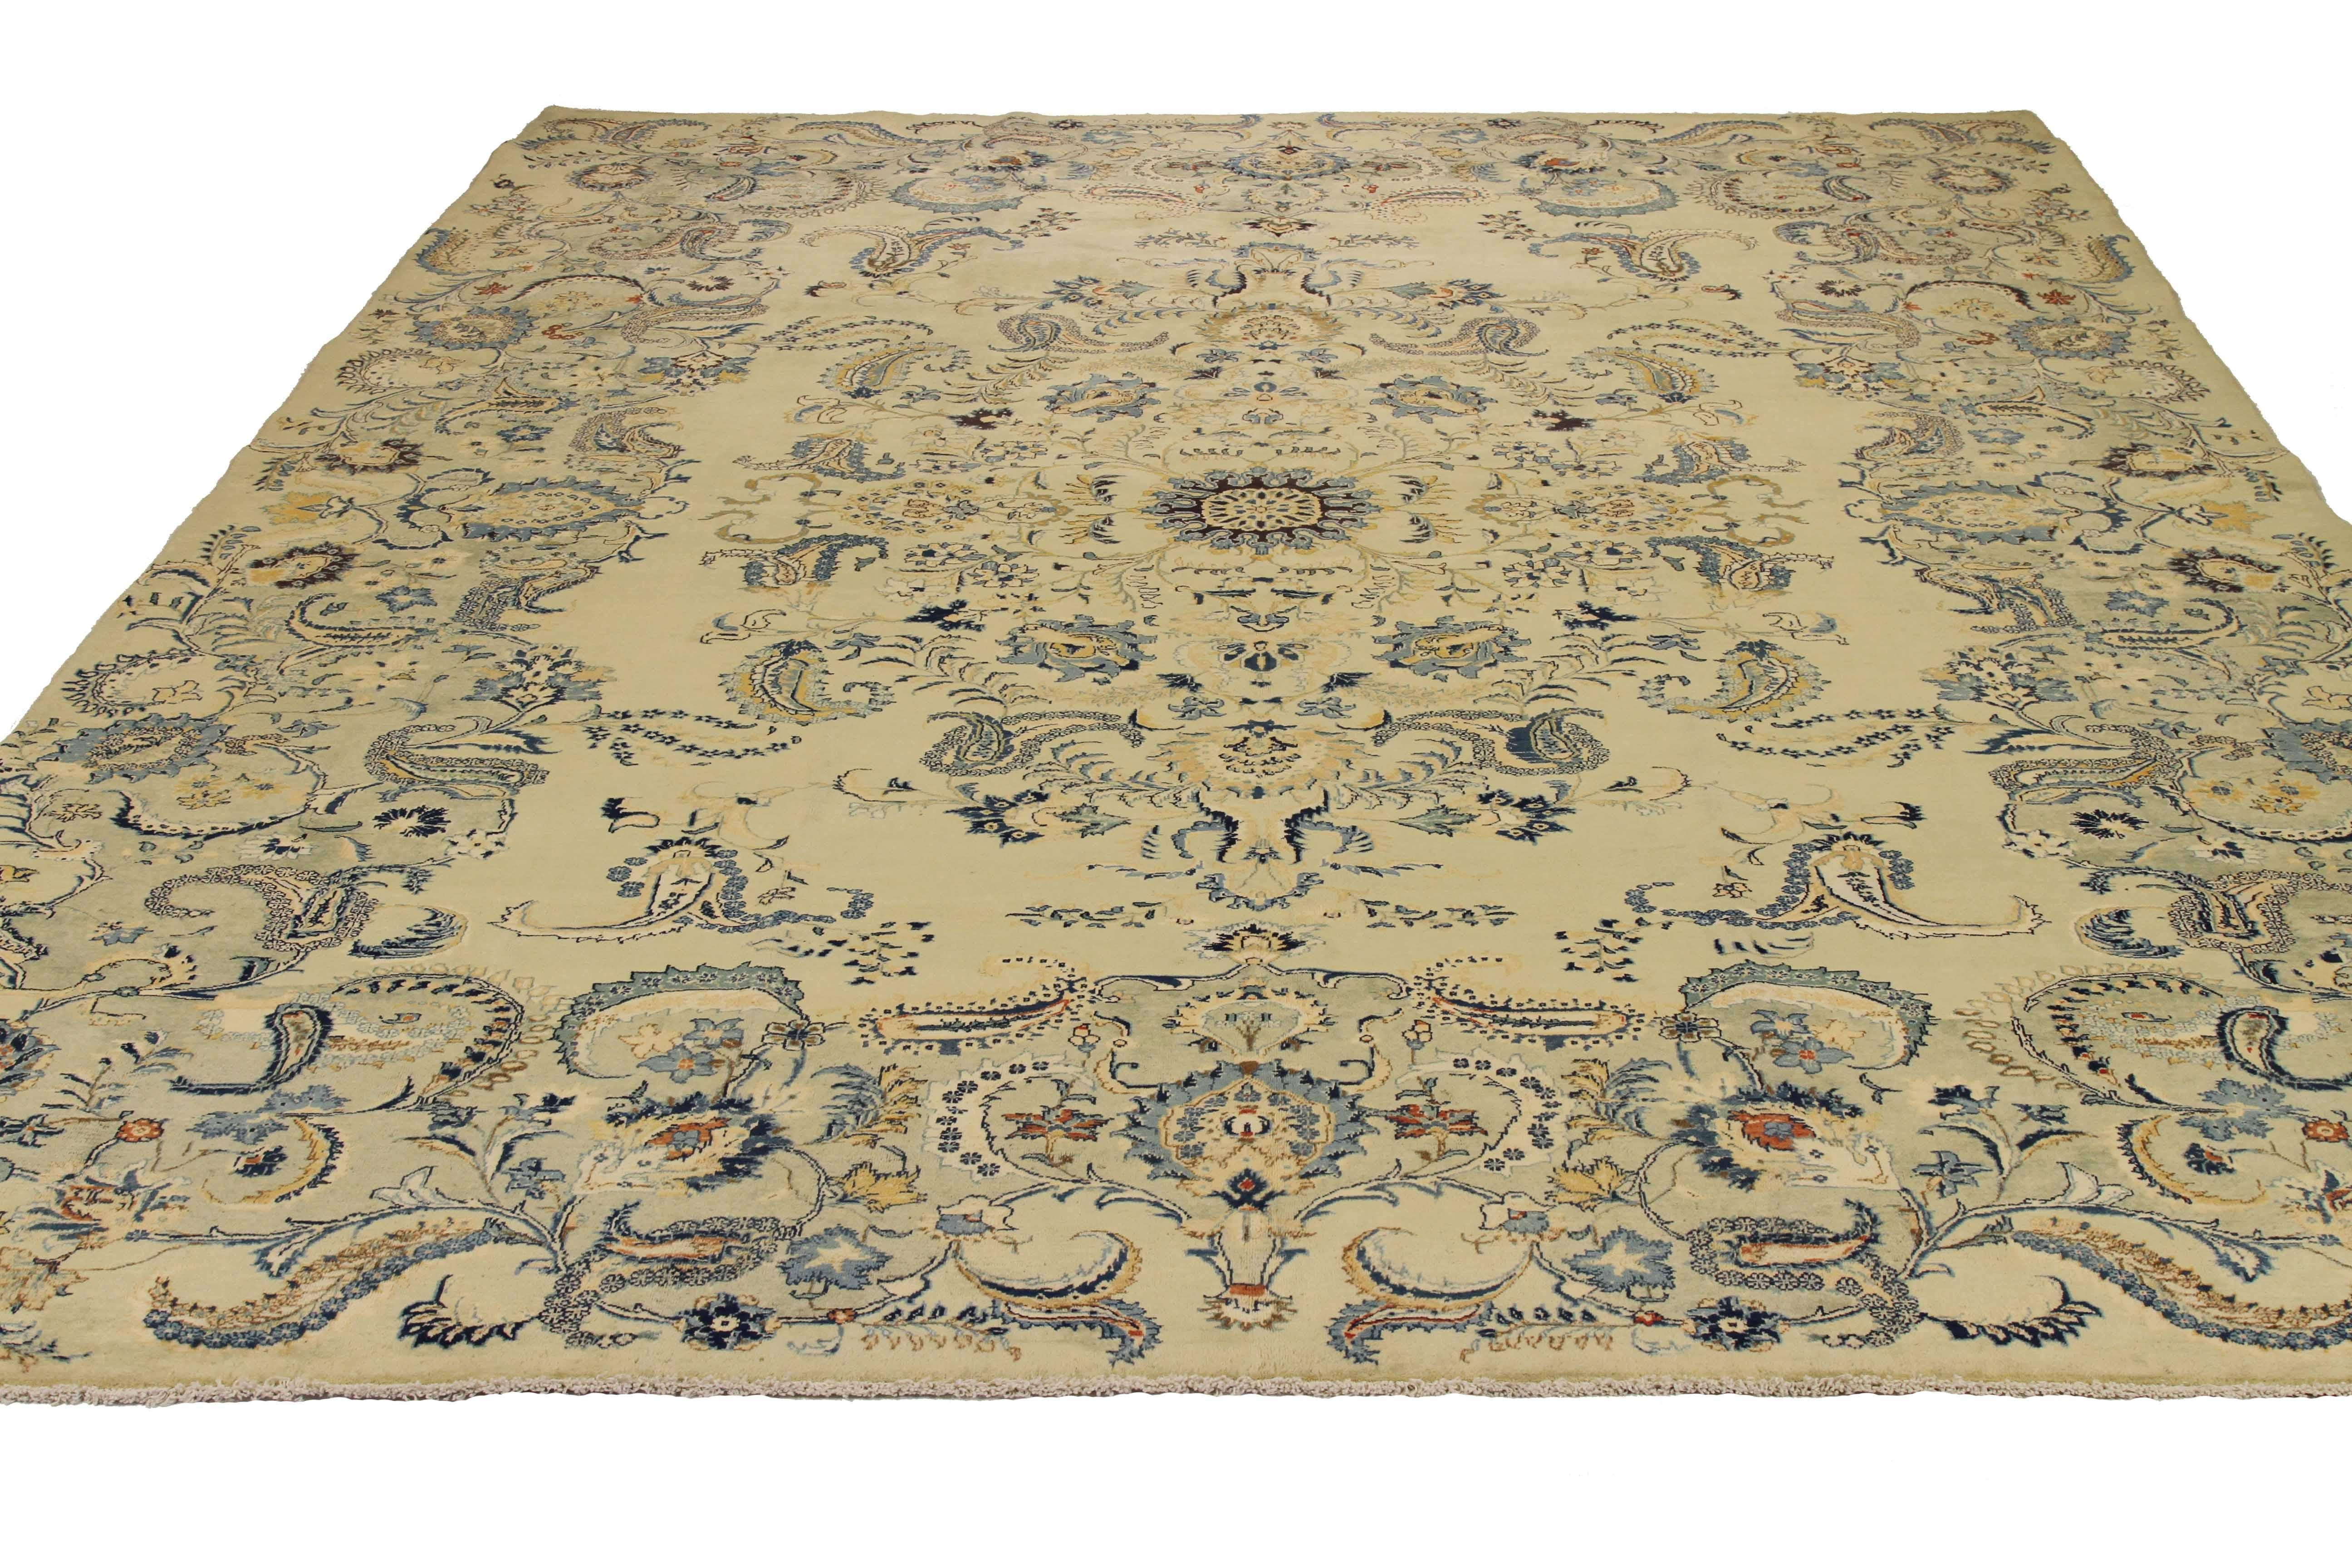 Antique Persian Area Rug, Handwoven with Finest Sheep's Wool, Colored with Natural Vegetable Dyes, Traditional Kashan Design, Expert Artisan Craftsmanship, Incorporates with any Home Interior Design, Large Dimension 9'10